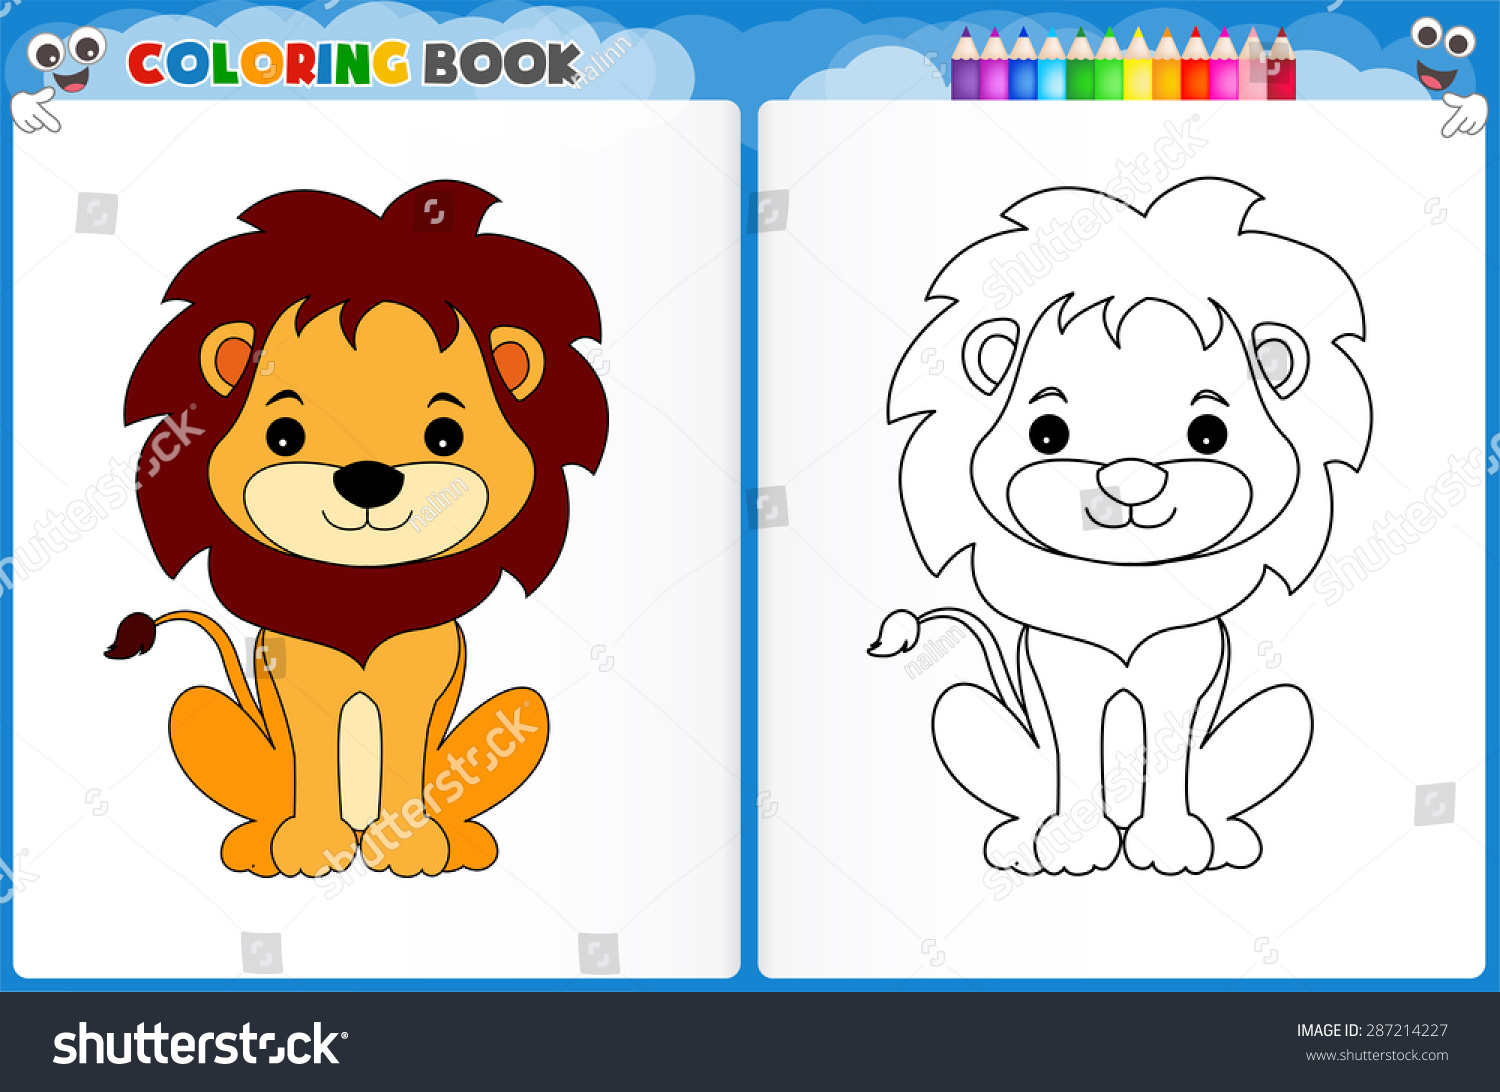 Coloring Page Cute Lion Colorful Sample Stock Vector Royalty Free ...